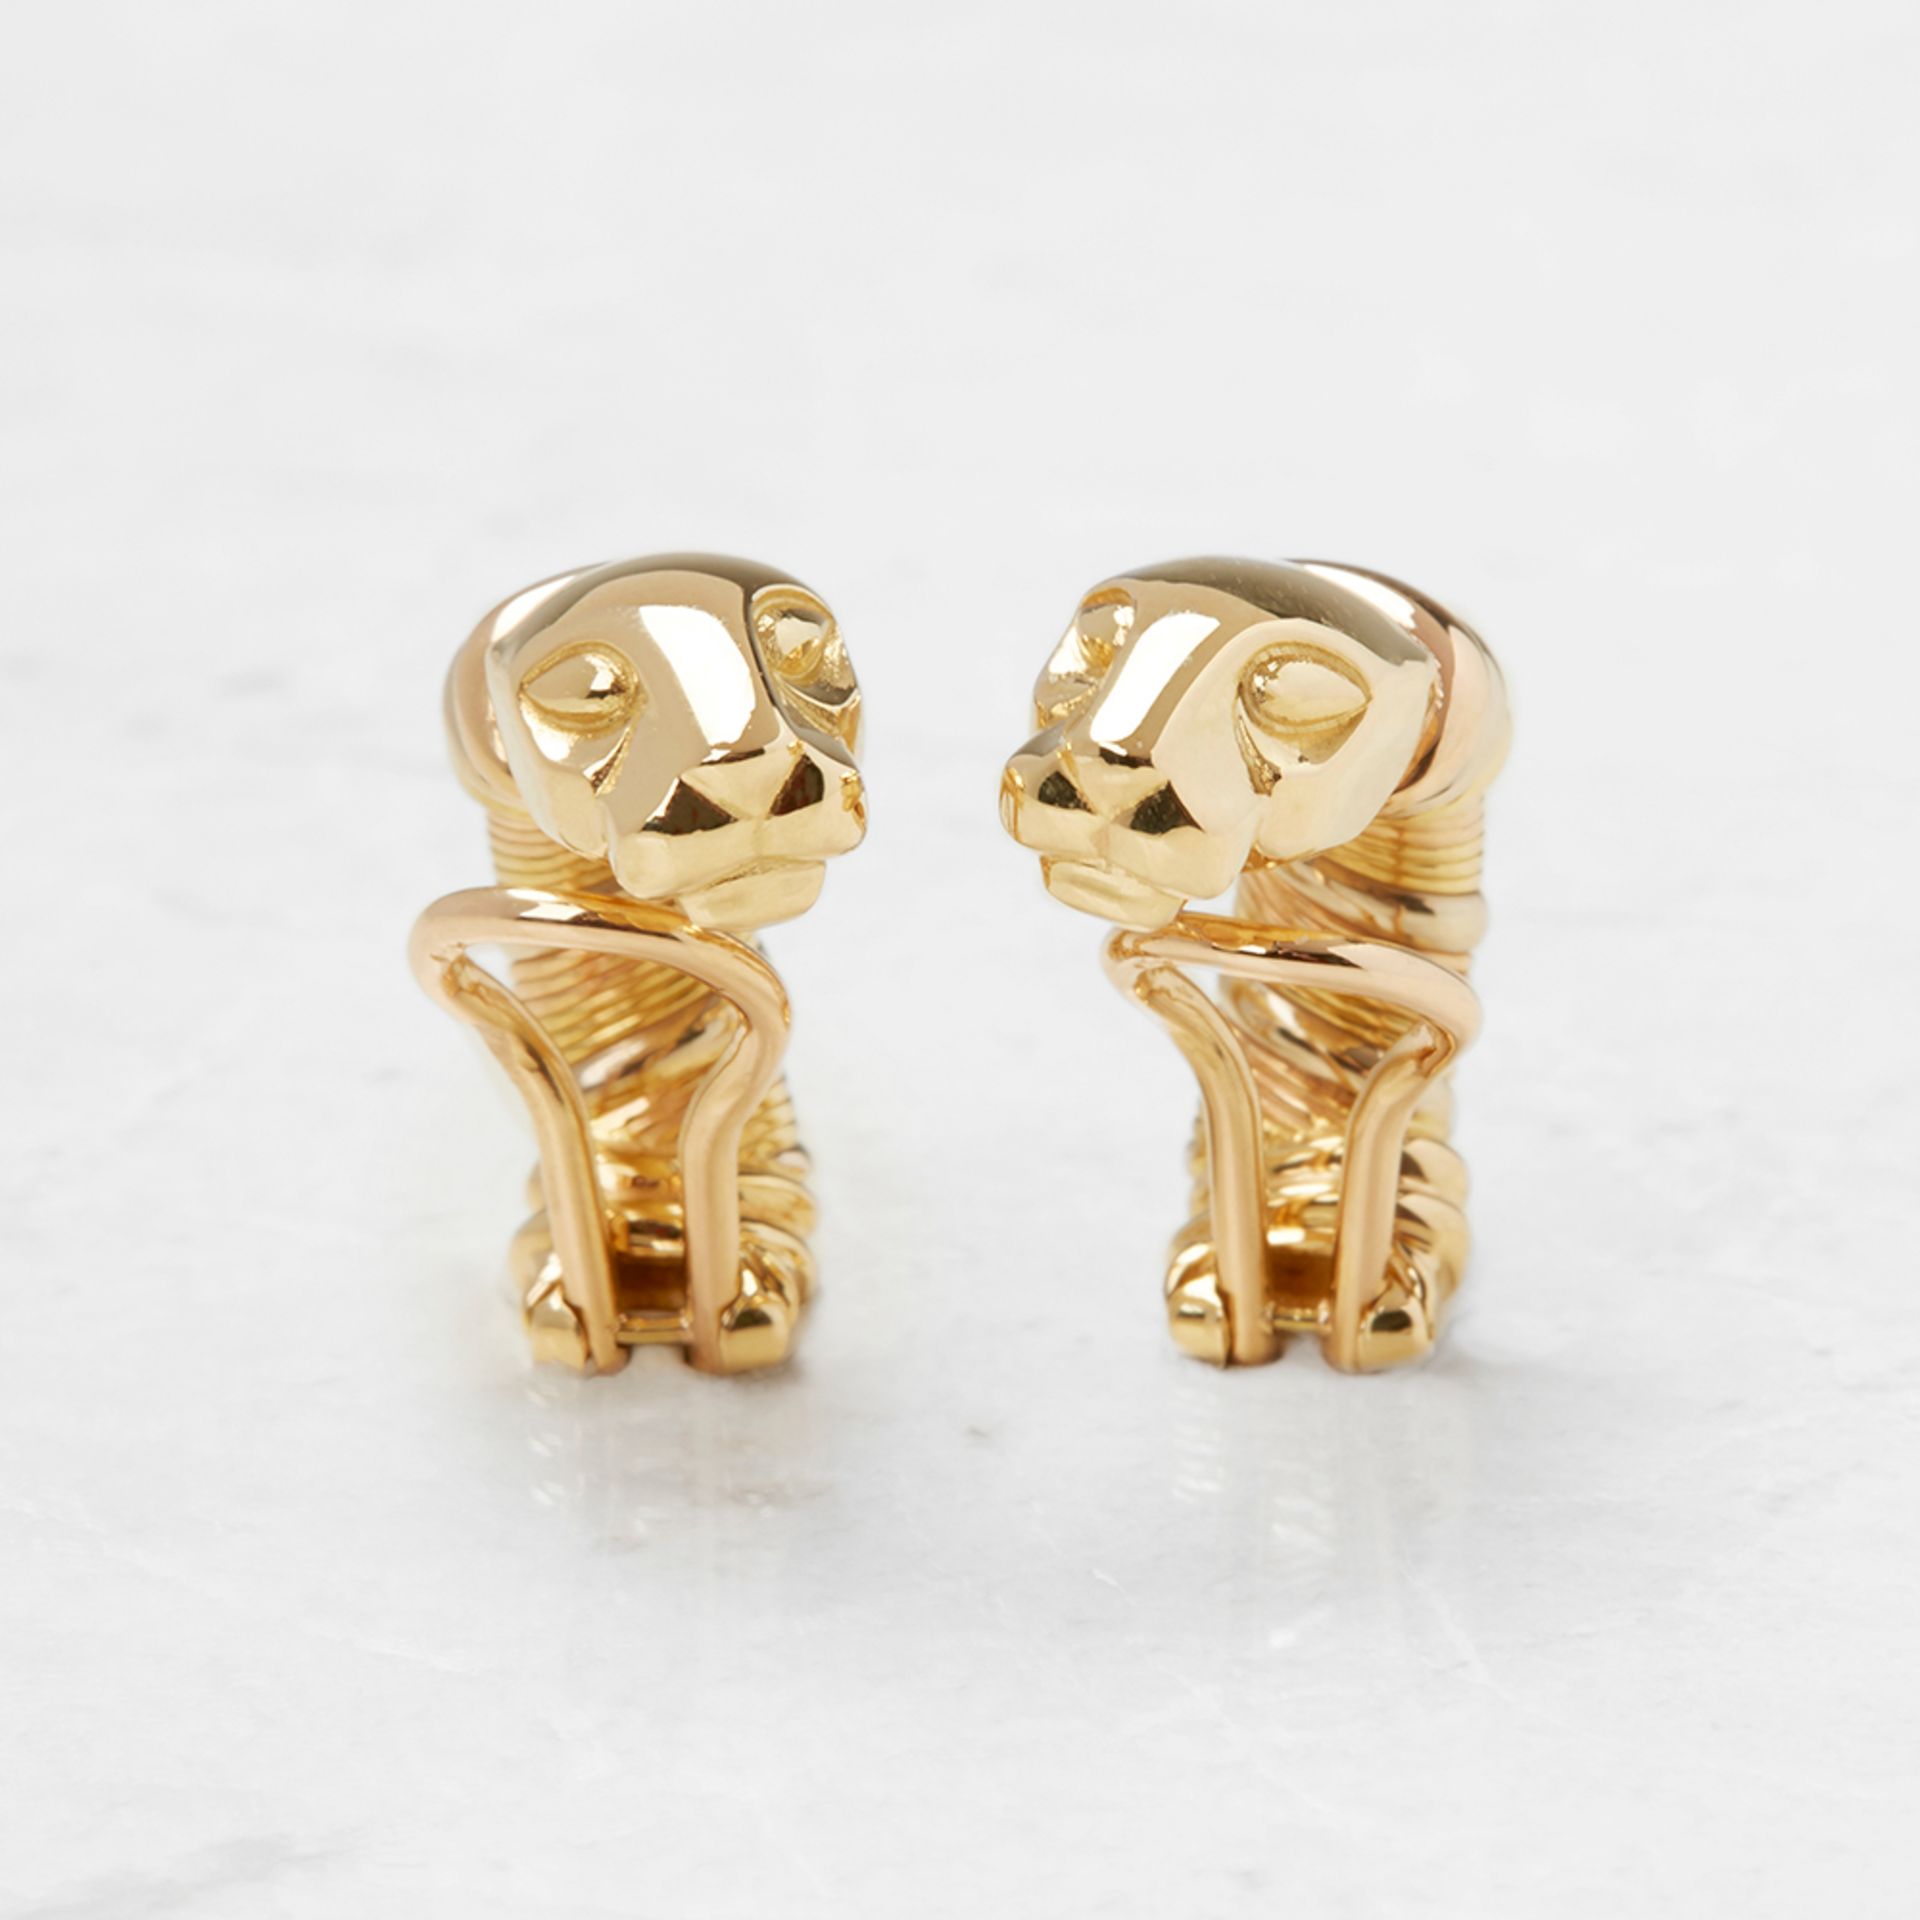 Cartier 18k Yellow Gold Panthère Earrings - Image 3 of 8